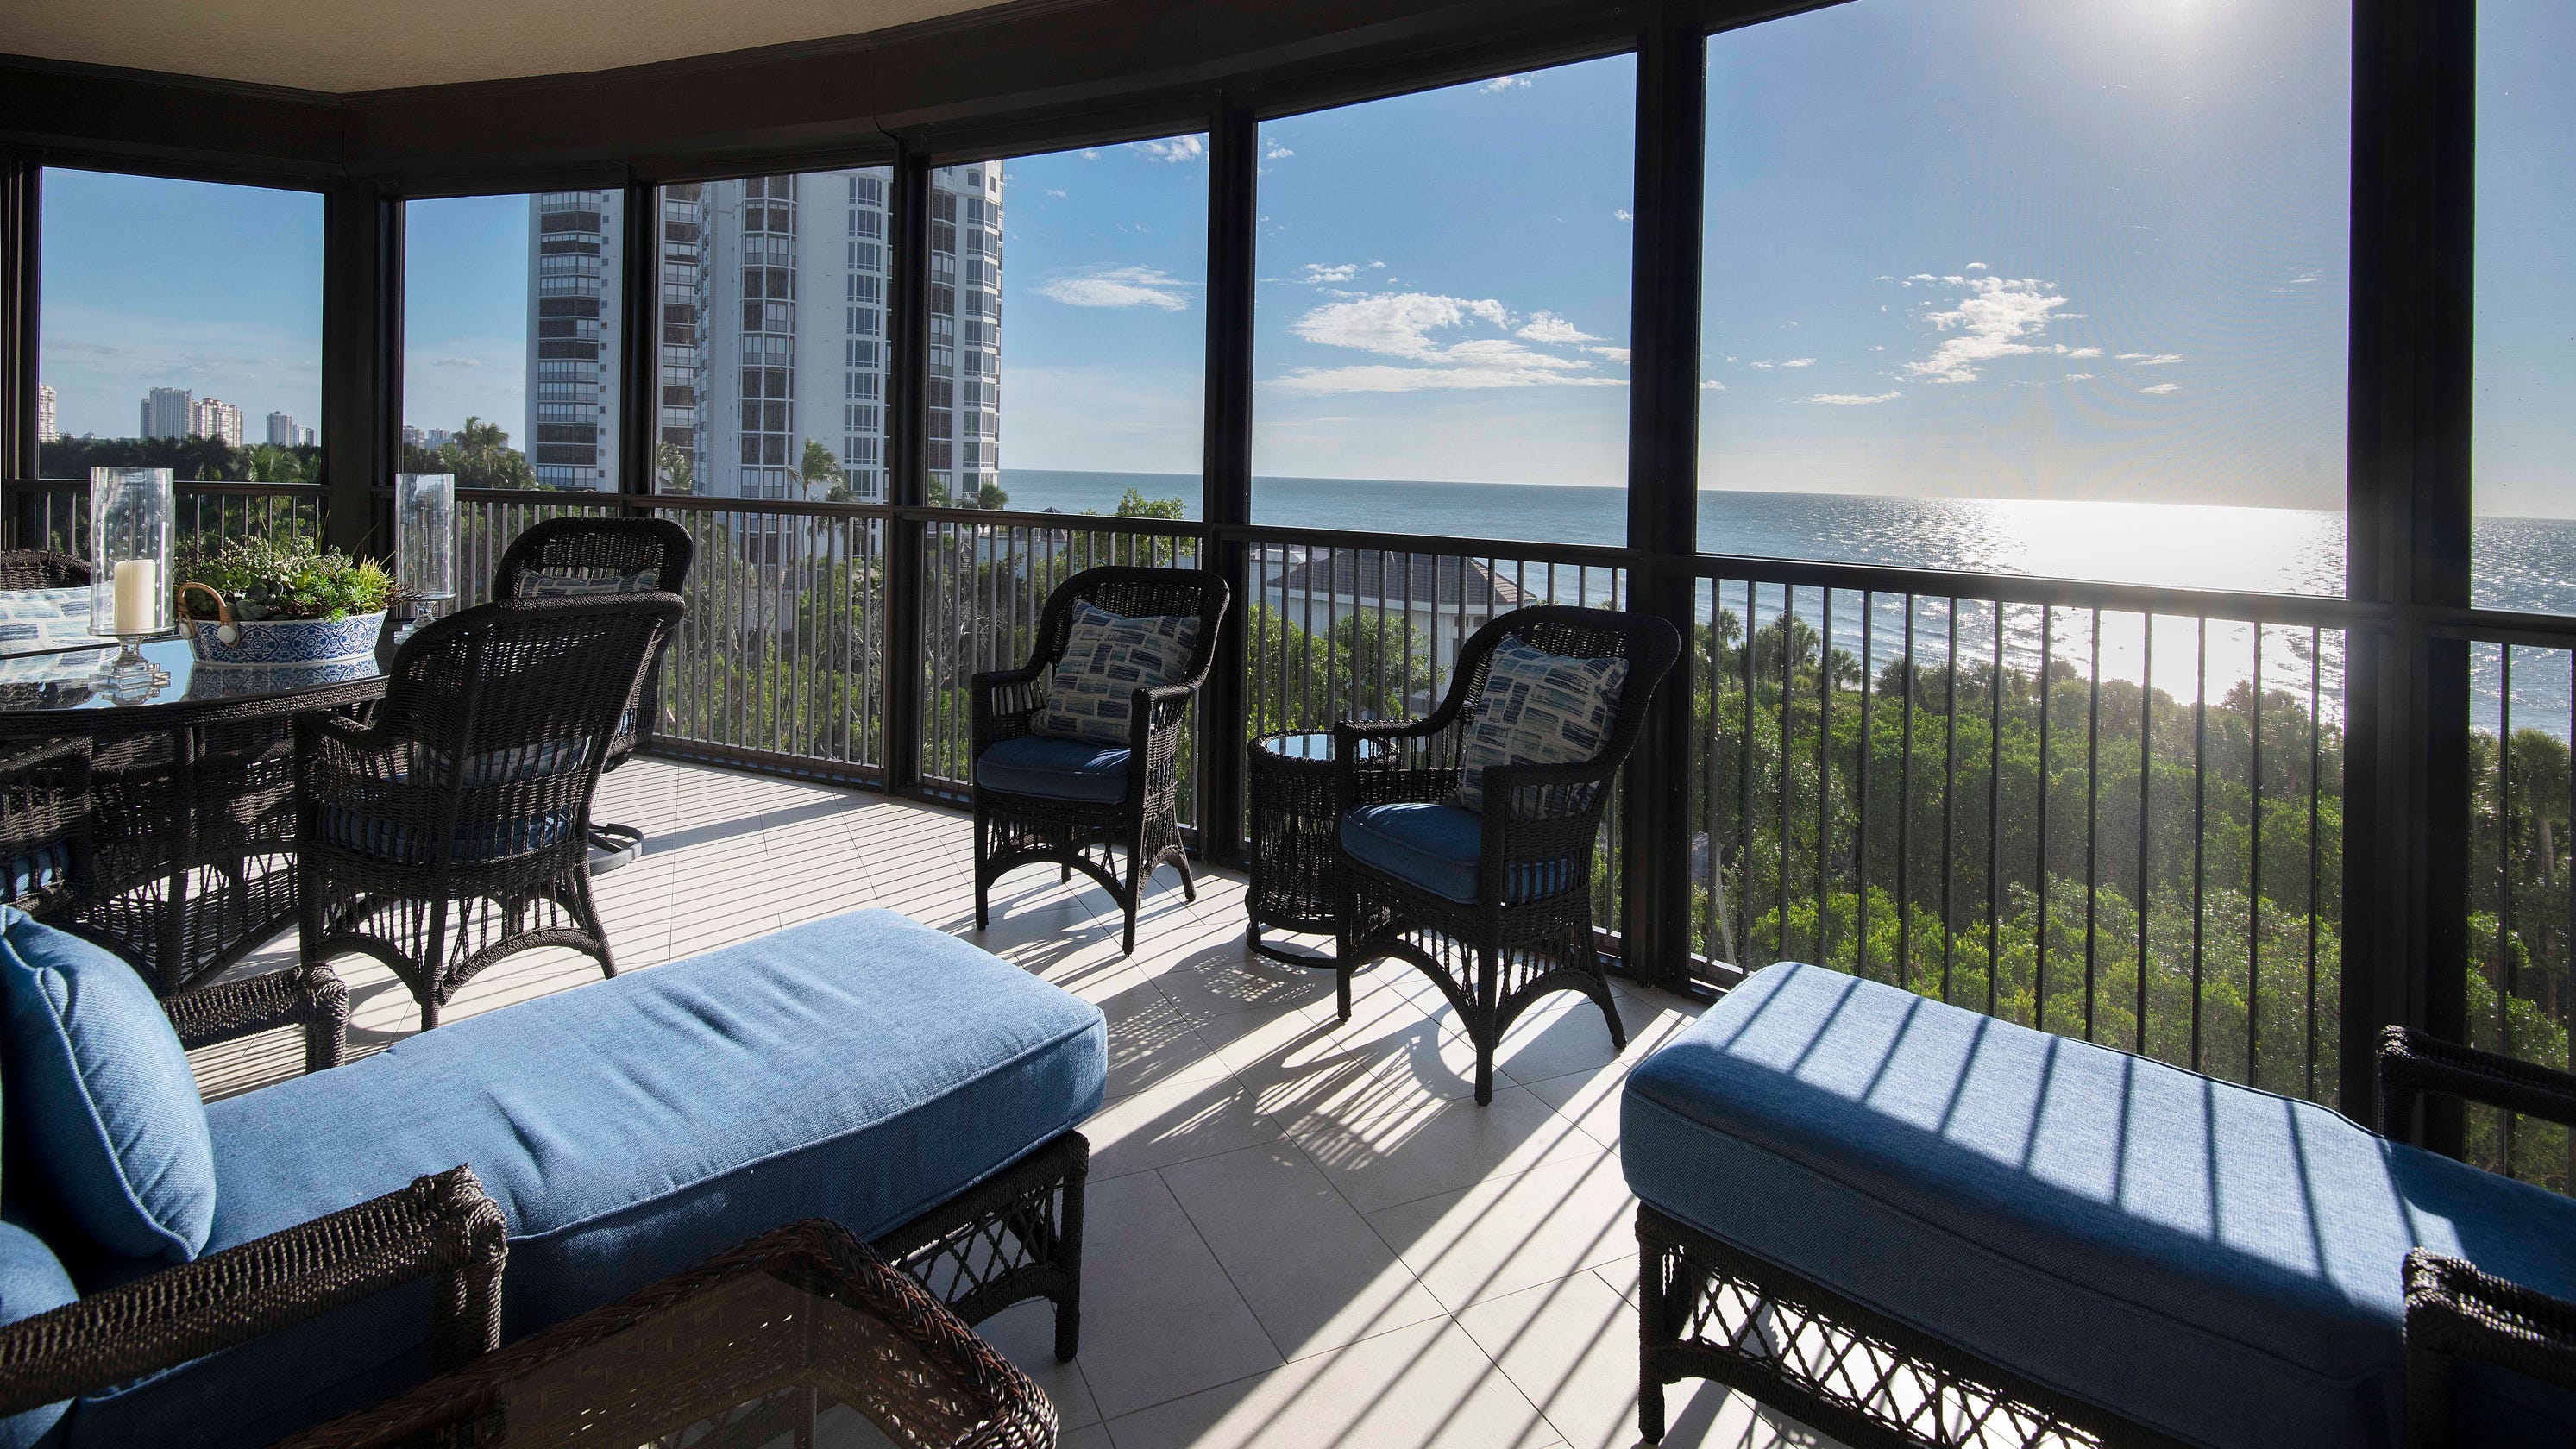 Theory Design completes new interior design for remodeled condo in Bay Colony